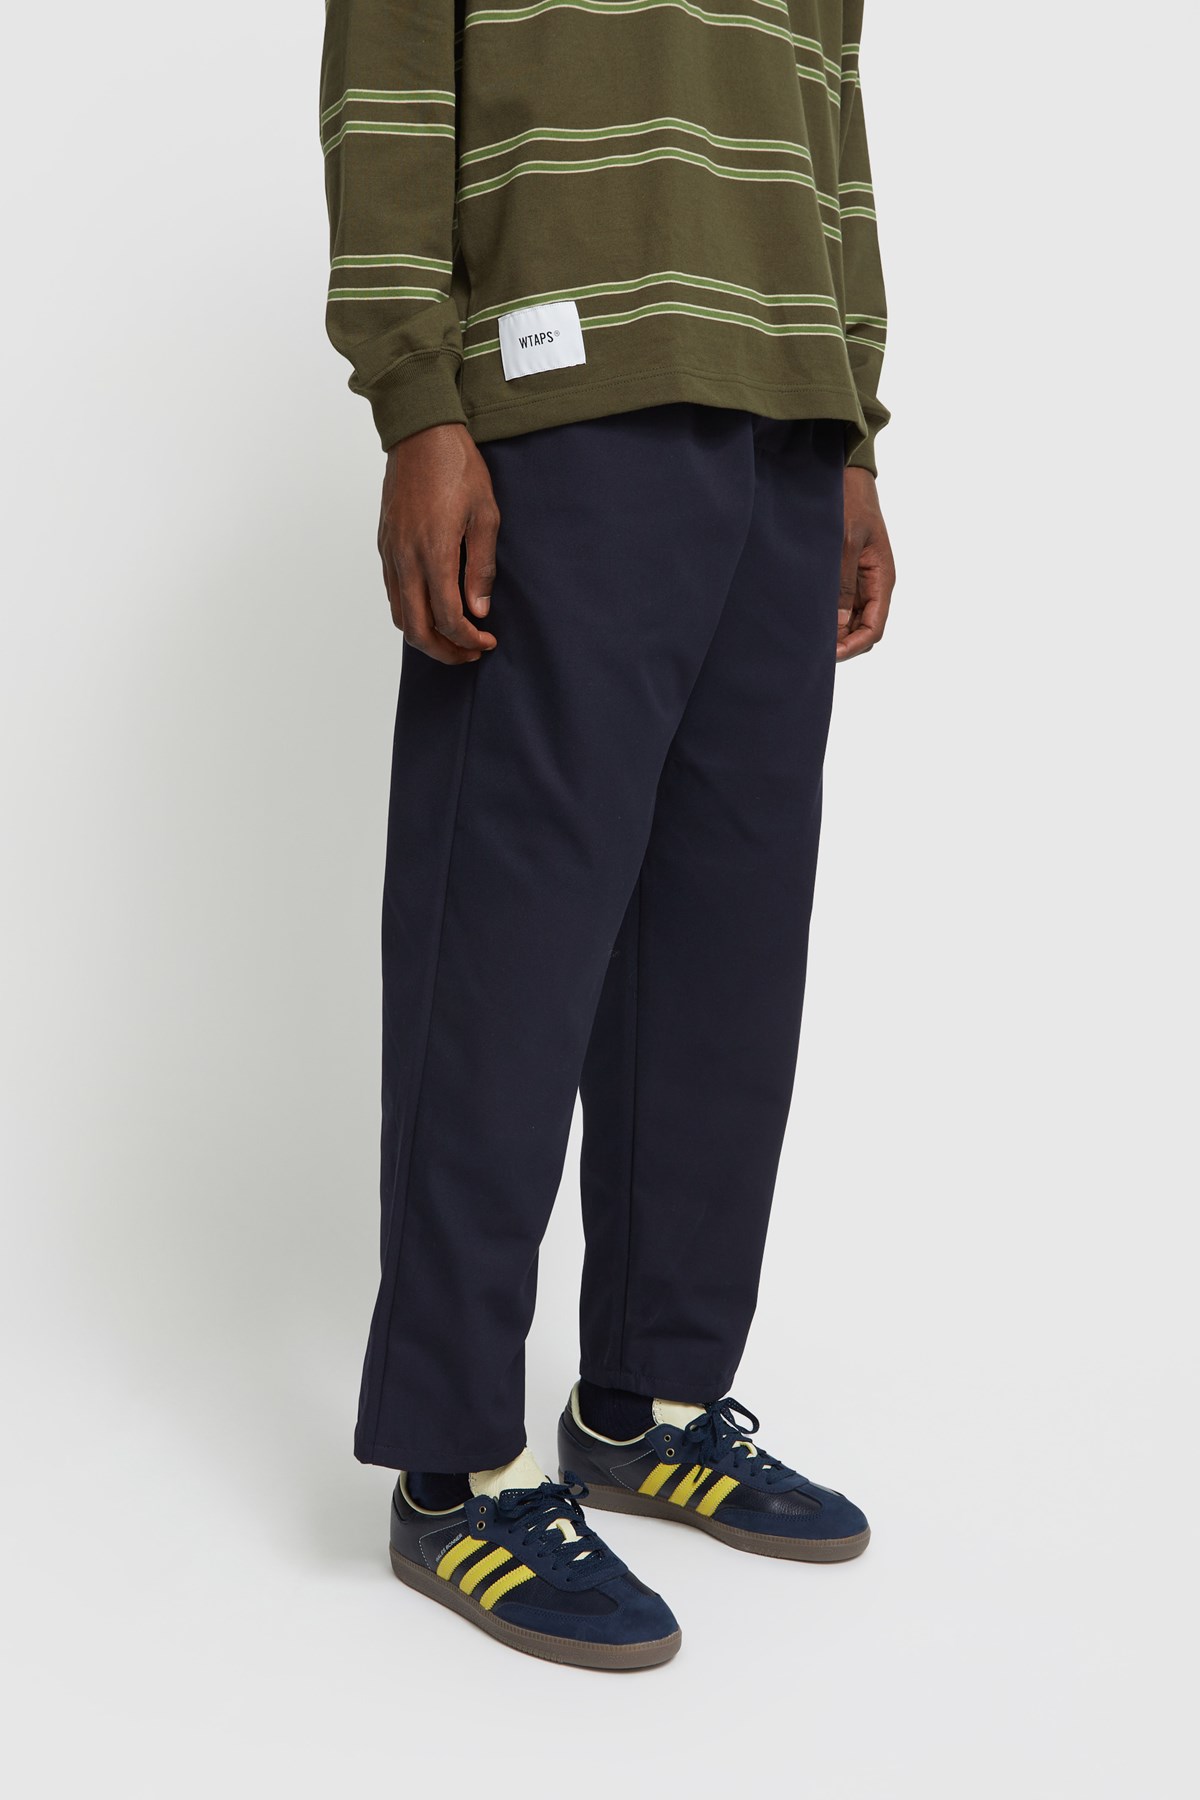 22SS WTAPS SEAGULL 02 / TROUSERS